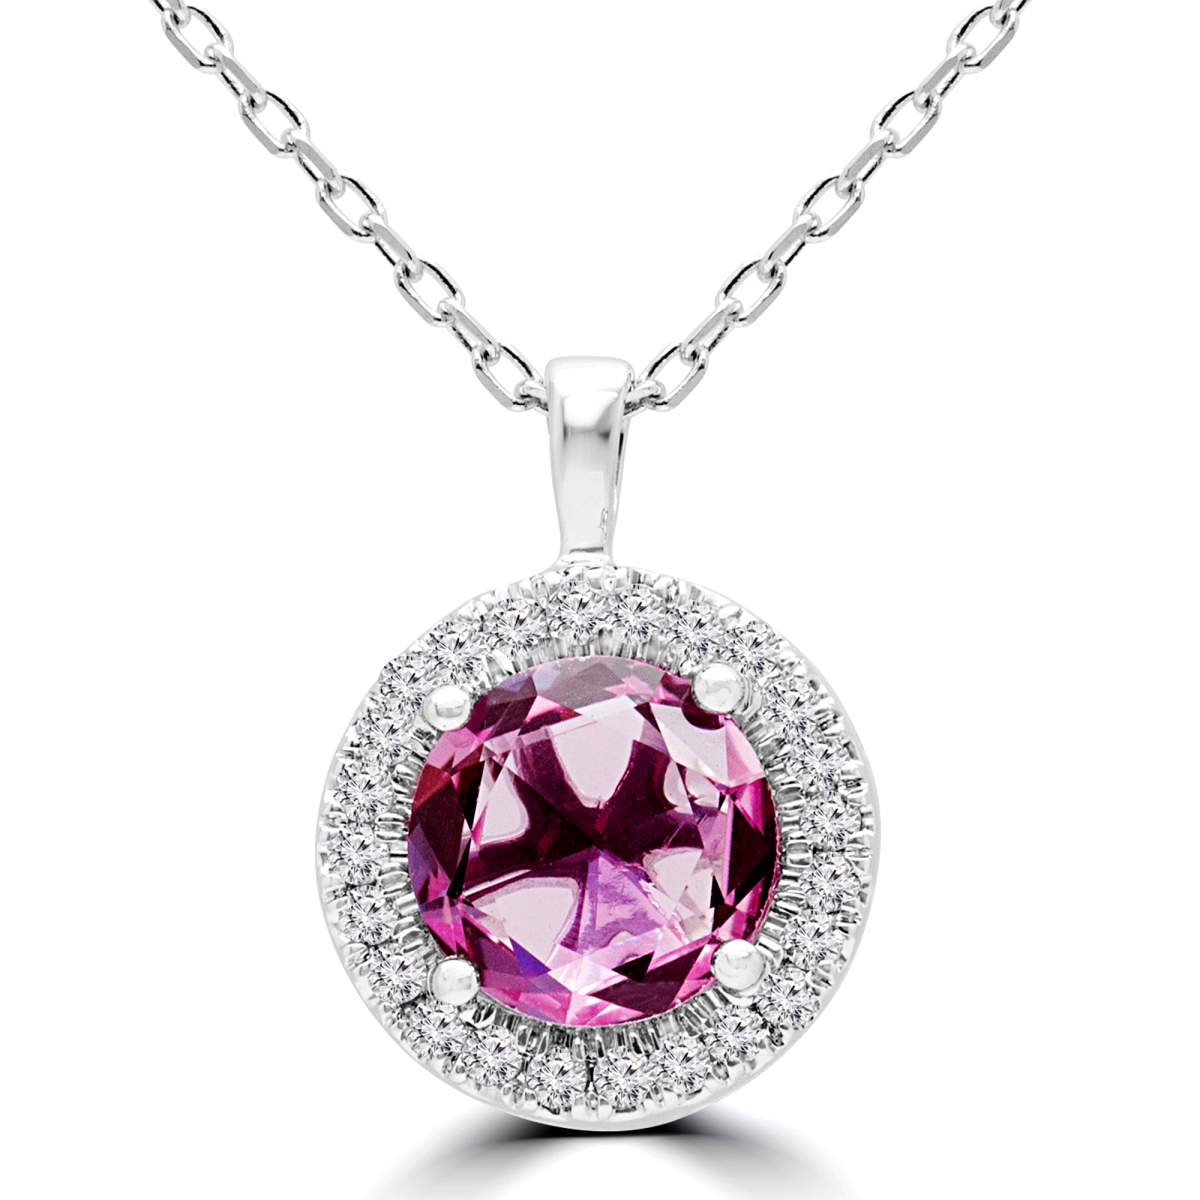 Mdr170161 0.87 Ctw Round Pink Tourmaline Halo Solitaire With Accents Pendant Necklace In 14k